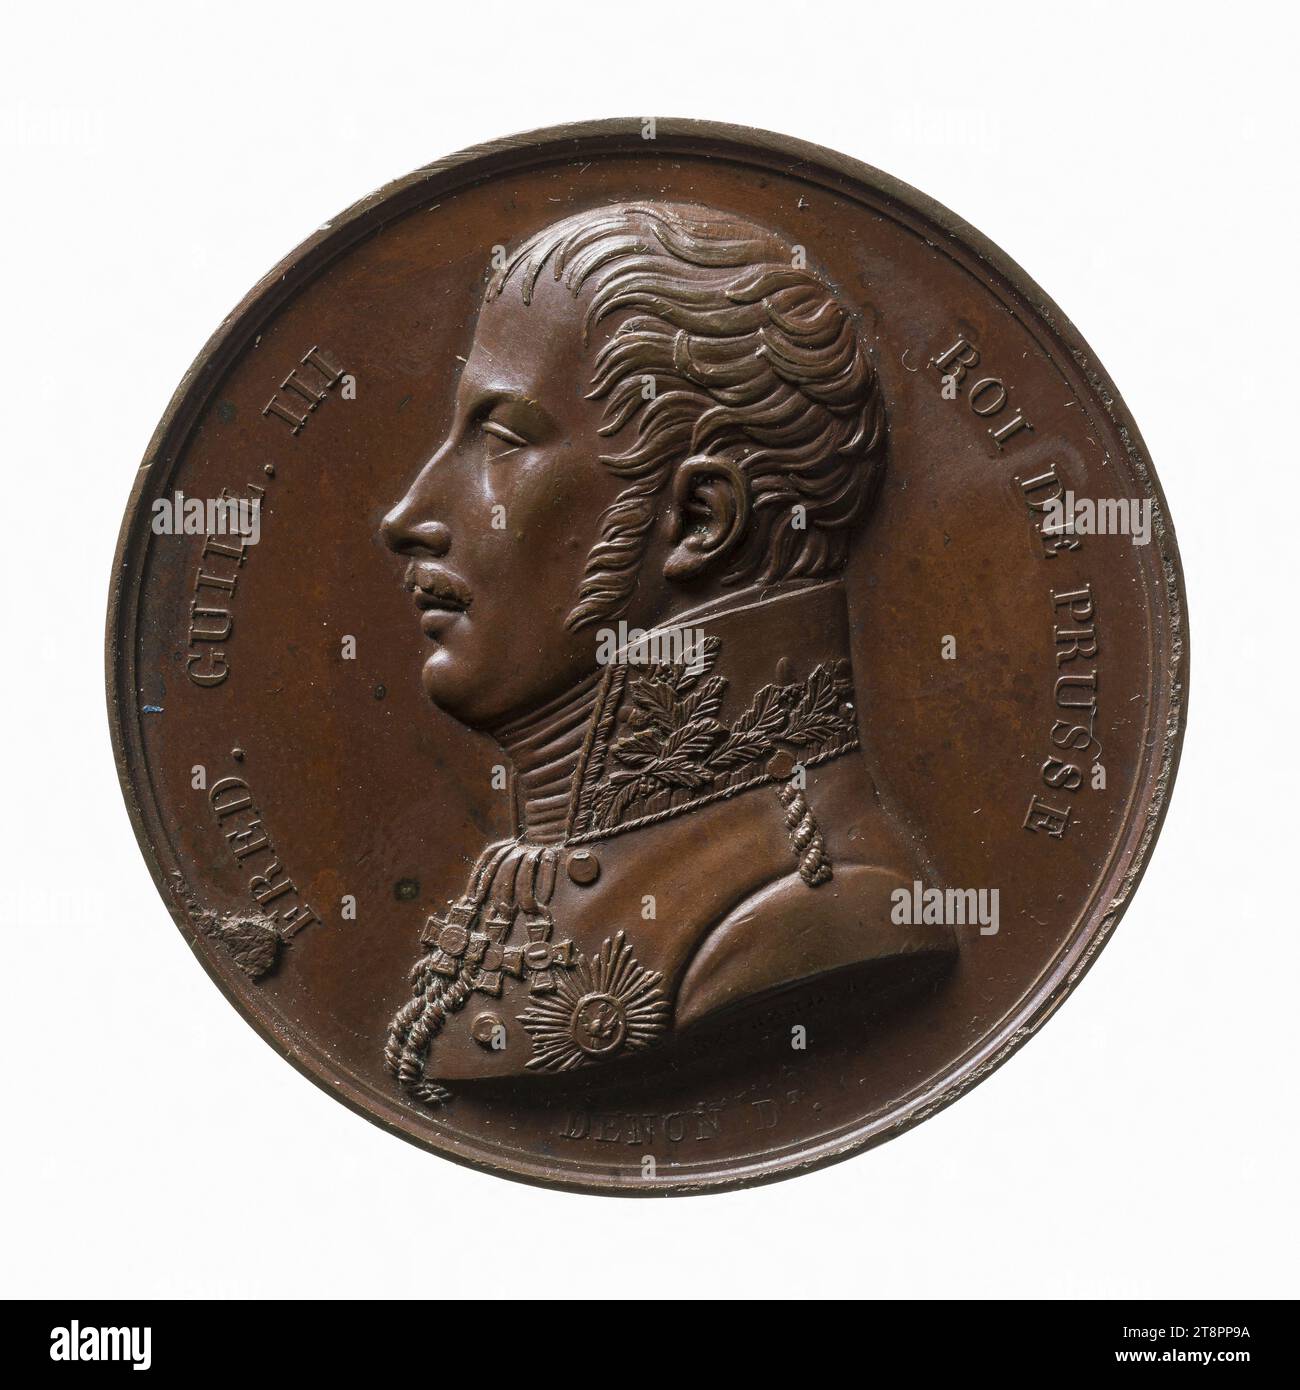 Visit of Frederick William III (1770-1840), King of Prussia (1797-1840), to the Mint of Medals, 1814, Andrieu, Bertrand or Jean-Bertrand, Engraver in medals, Vivant-Denon, Dominique, Draughtsman, In 1814, Numismatic, Medal, Paris, Dimensions - Work: Diameter: 4 cm, Weight (type size): 34.36 g Stock Photo